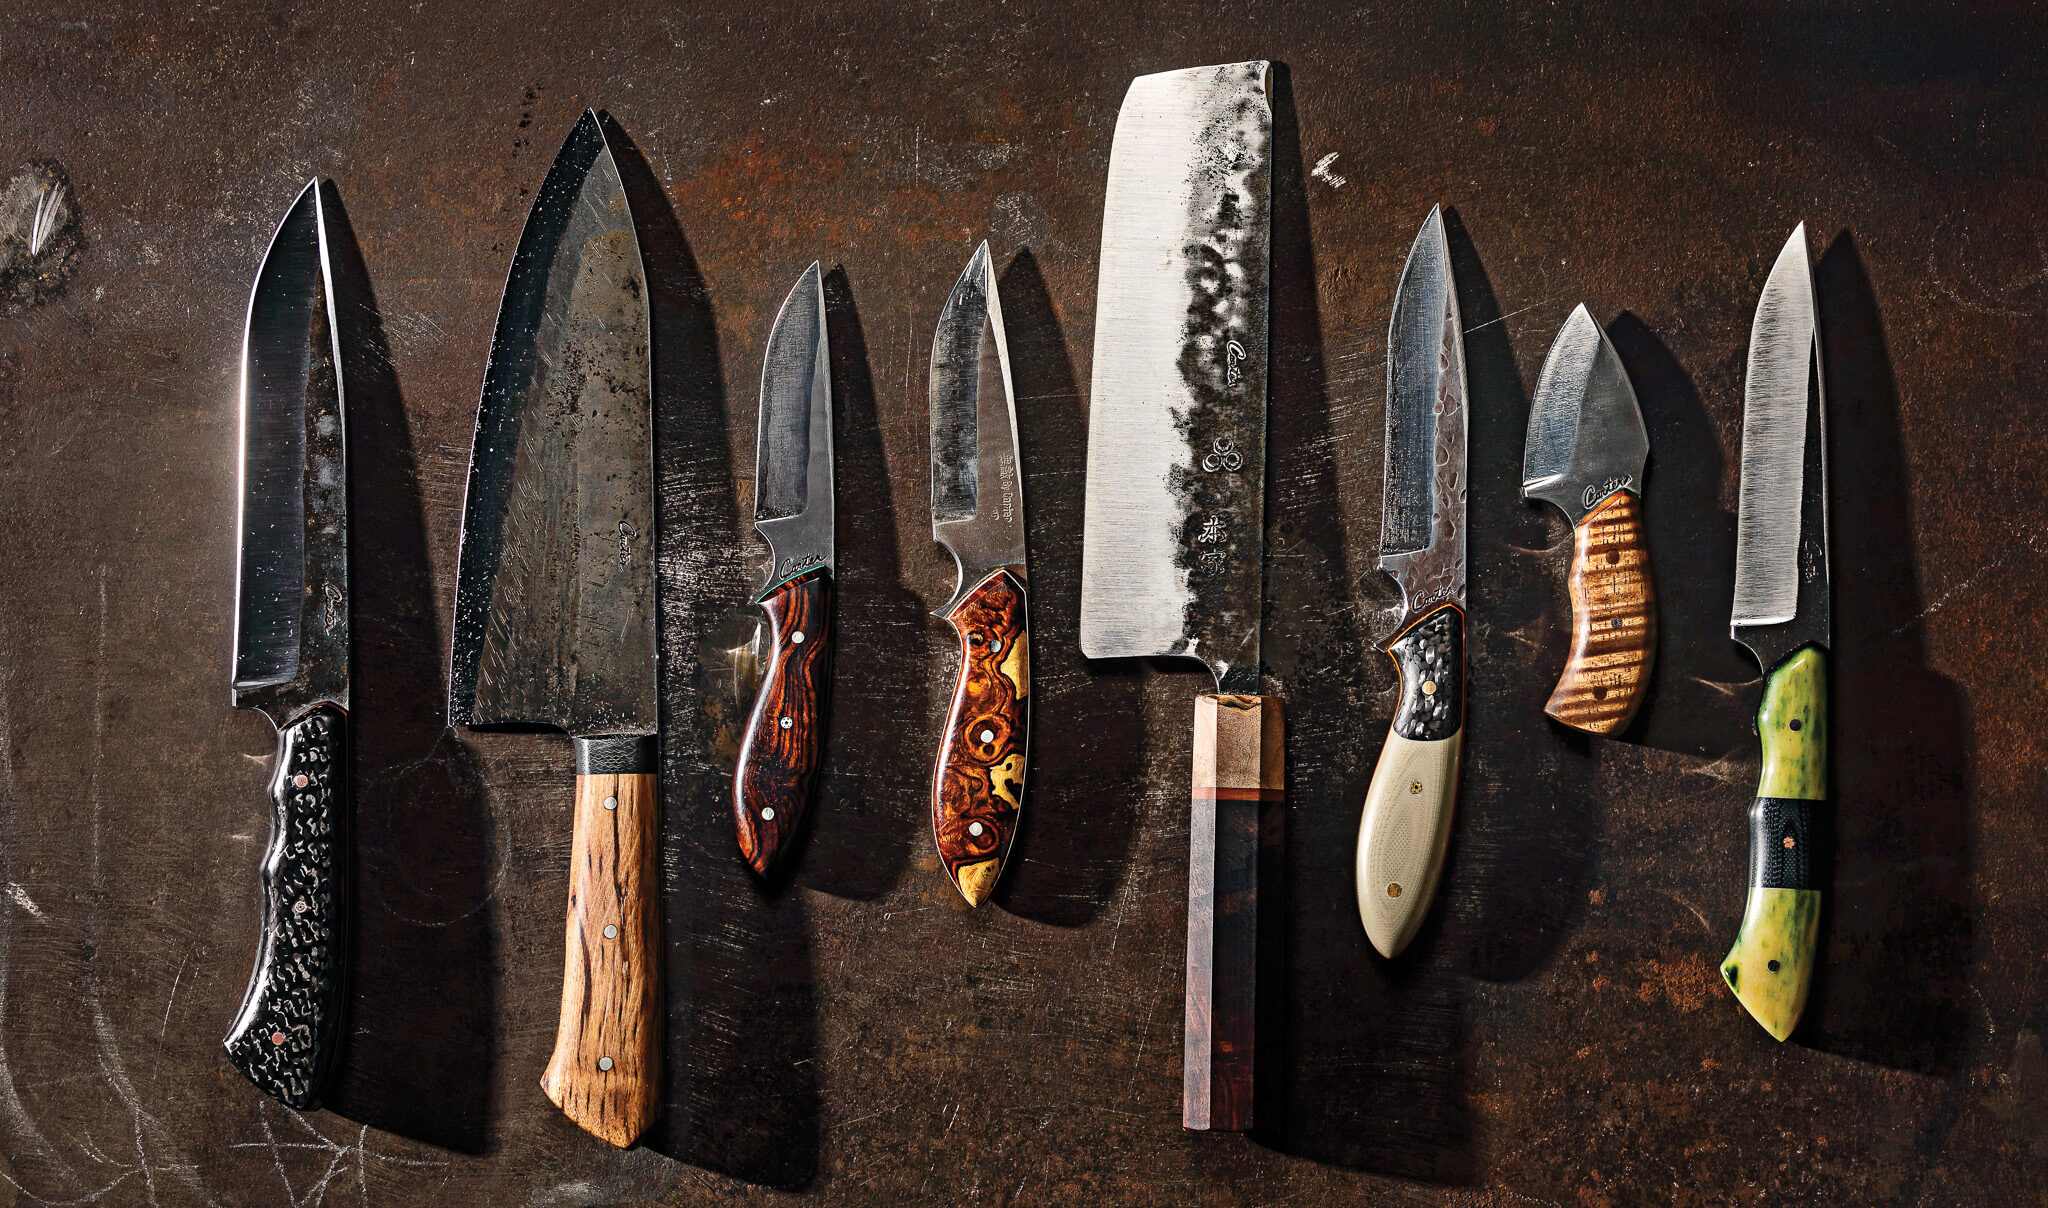 A collection of knives handmade in Portland lined up on a table.